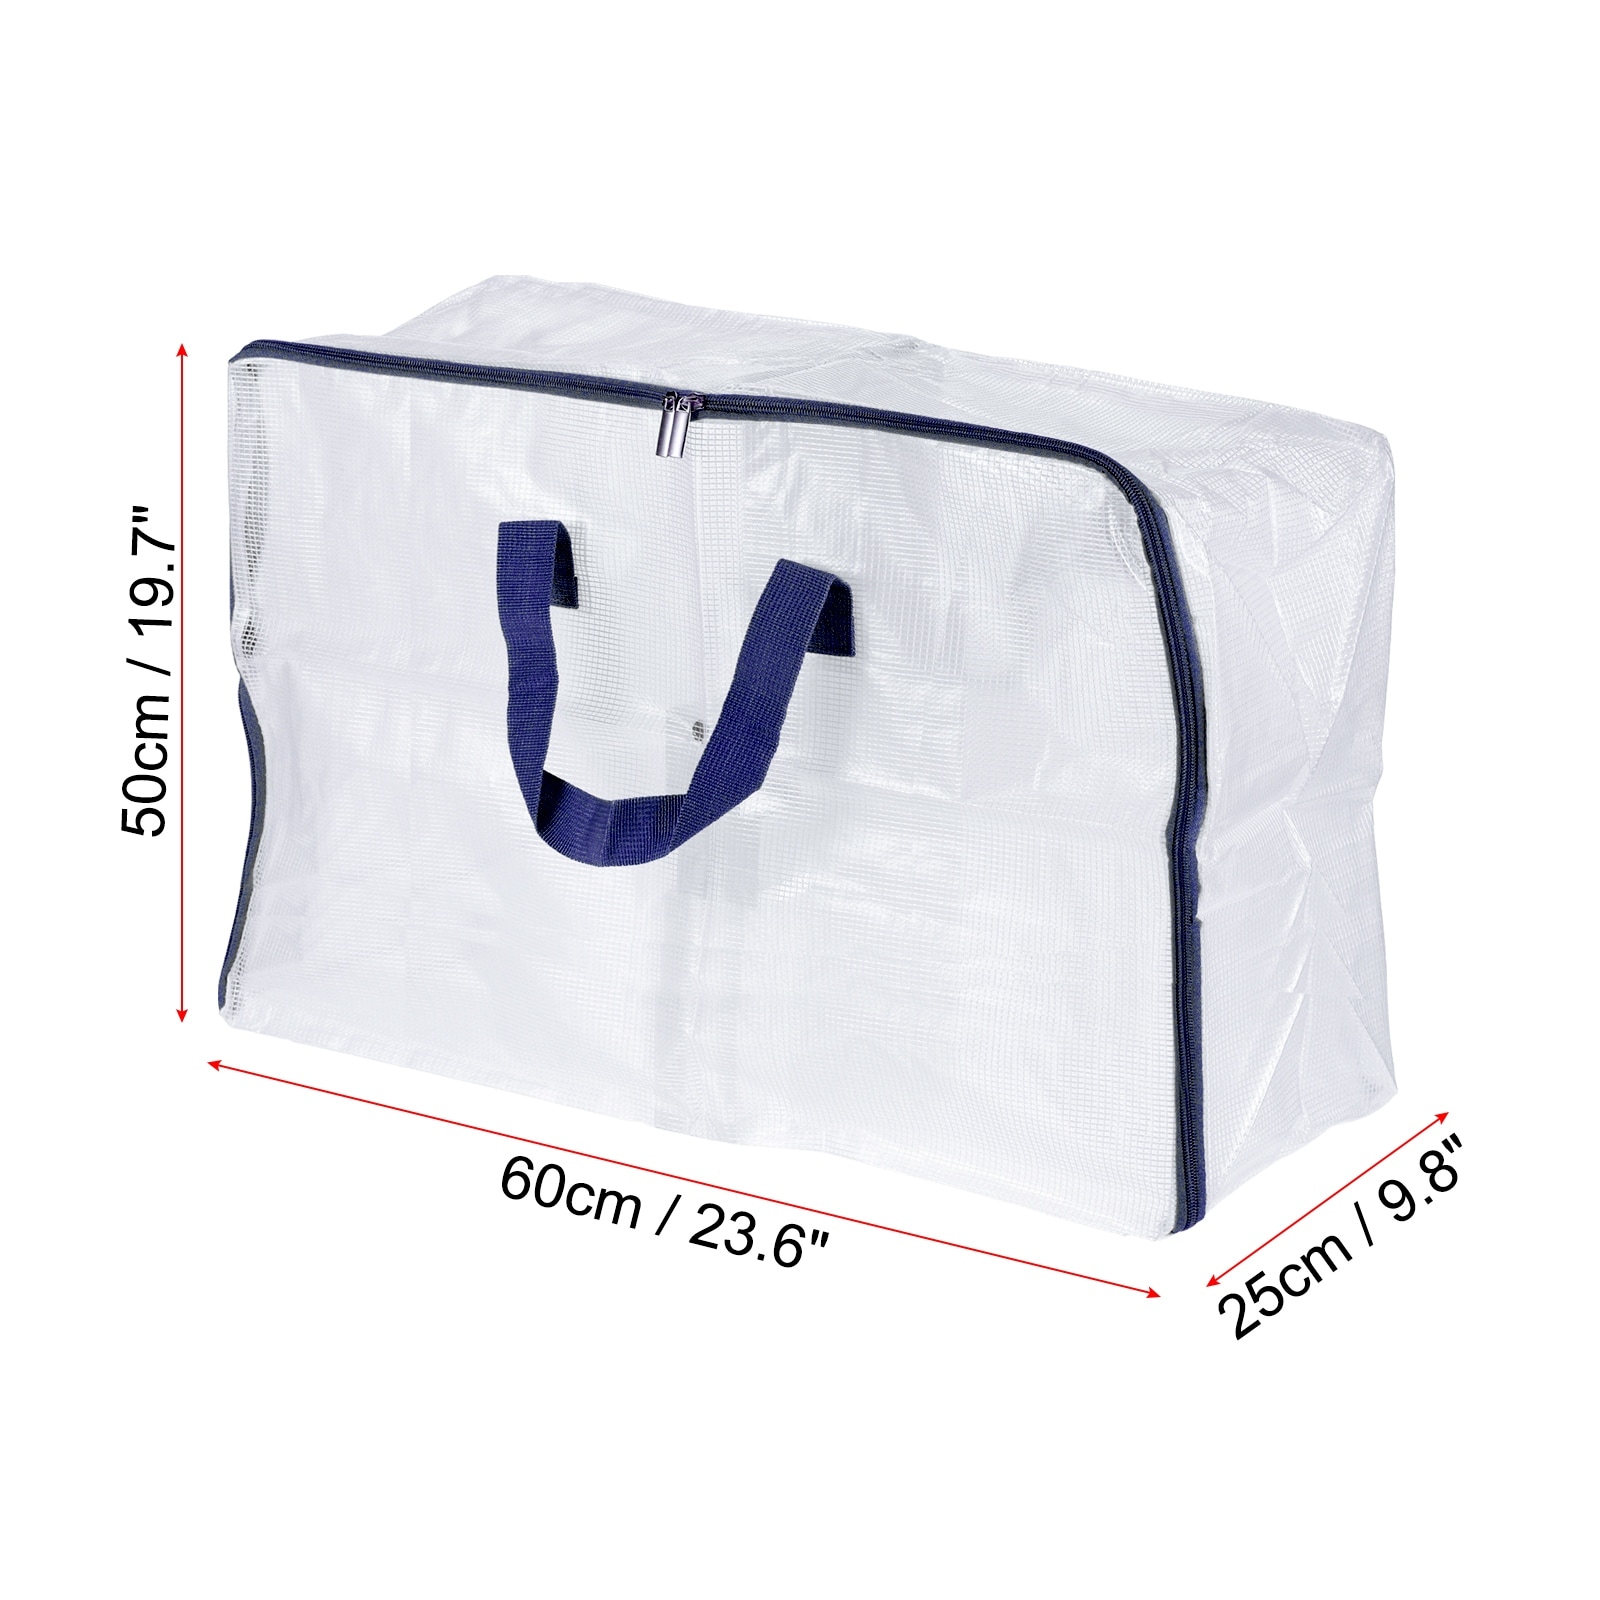 https://ak1.ostkcdn.com/images/products/is/images/direct/2d1f32137611b4fa44c40a62752d0e8beb3854cc/Closet-Storage-Bags%2C-Extra-Large-Foldable-Clothes-Organizer-Tote-Bag%2C-Navy-Blue.jpg